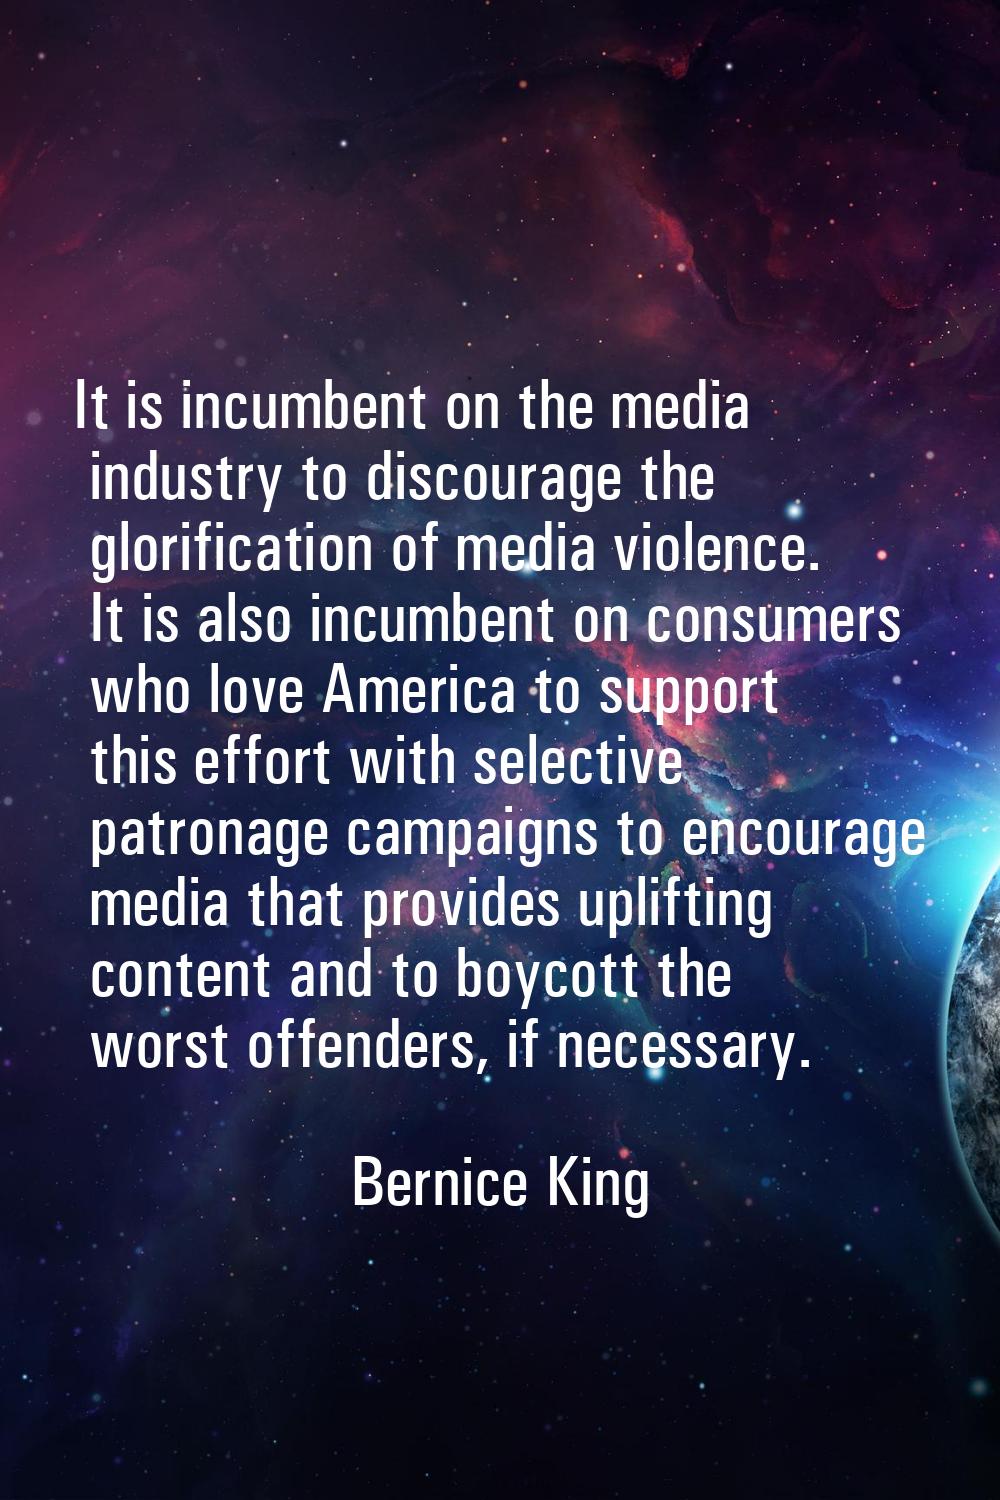 It is incumbent on the media industry to discourage the glorification of media violence. It is also